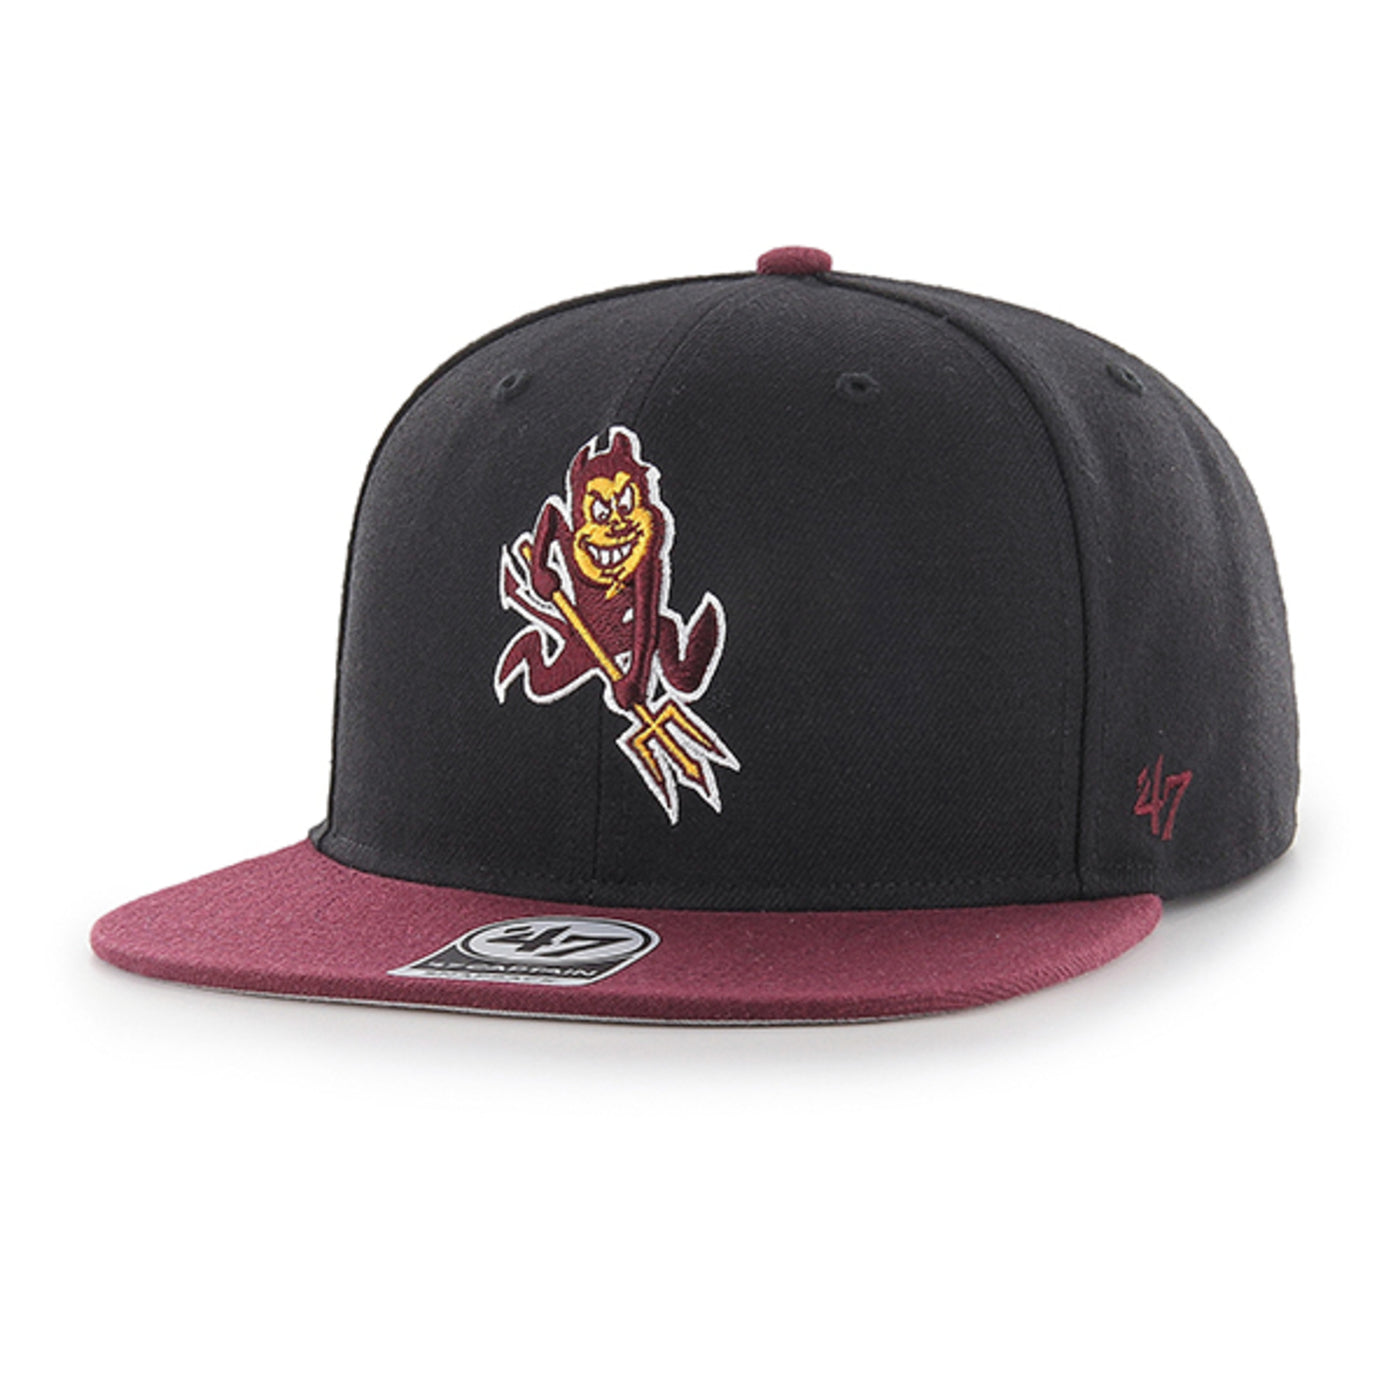 ASU black snap back hat with maroon bill and Sparky embroidered on the front